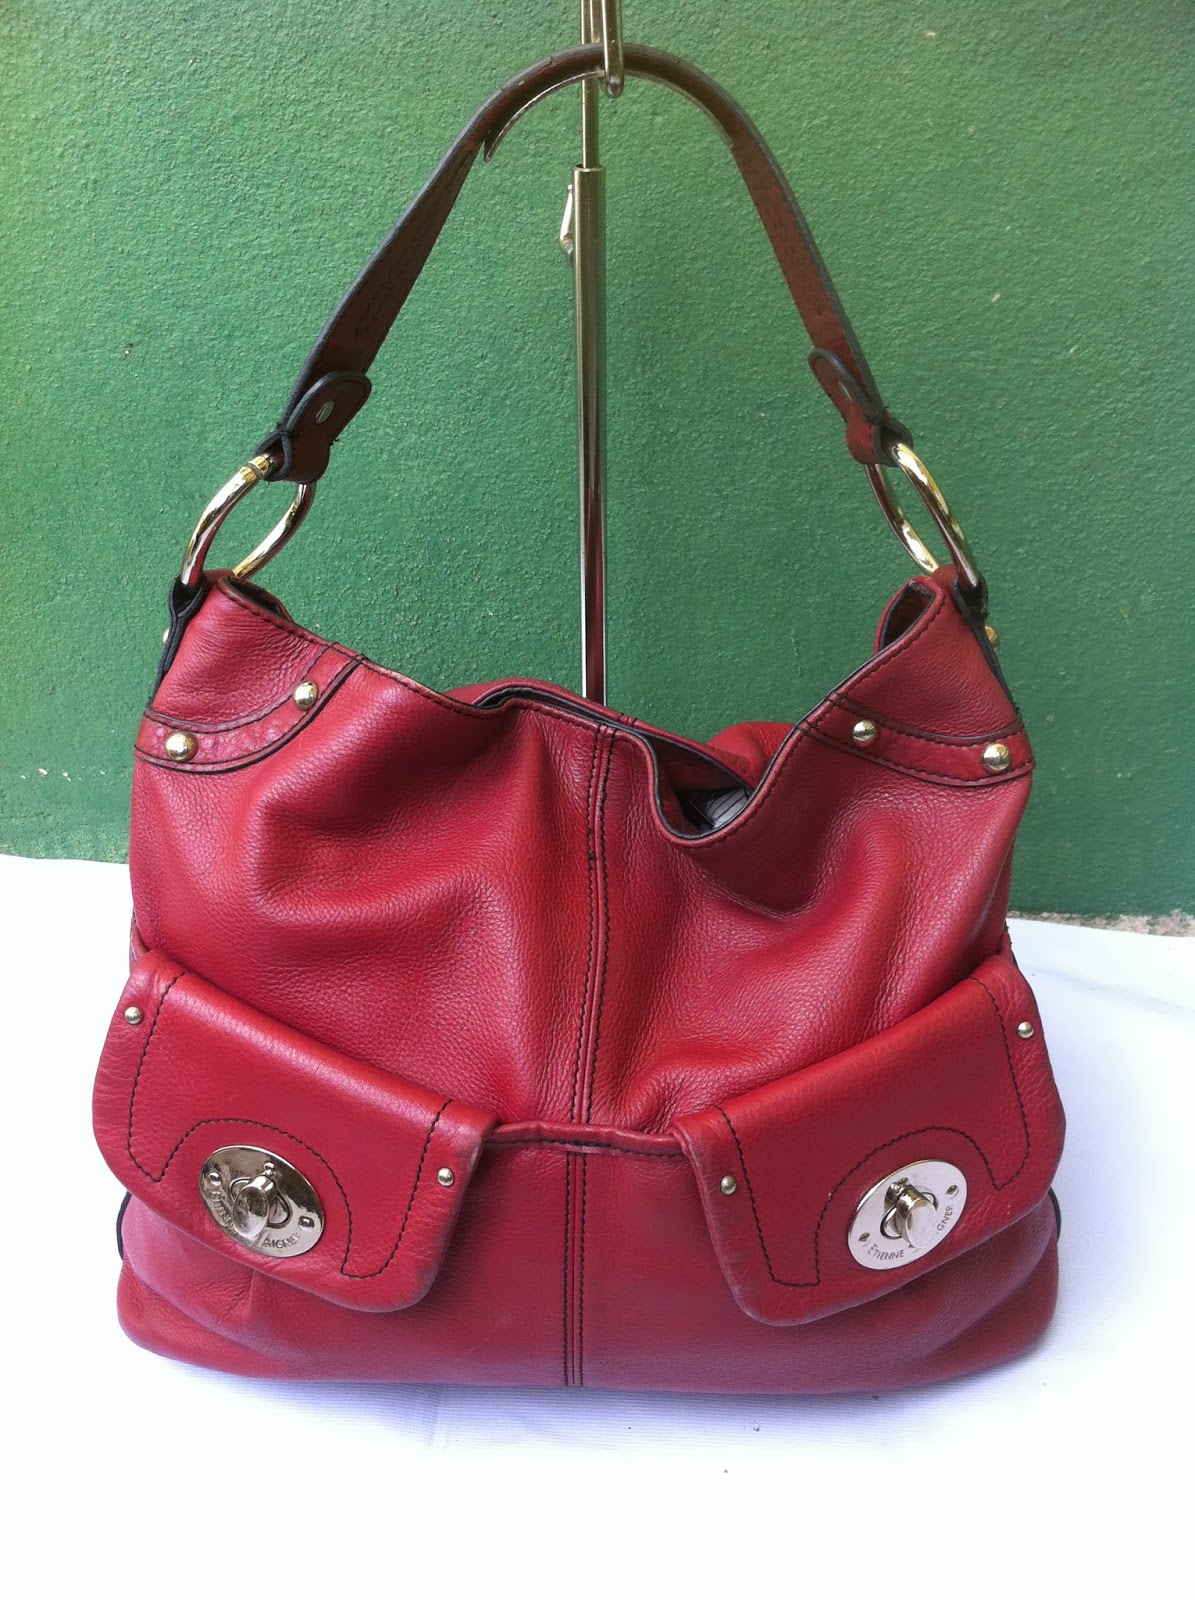 DYBUNDLE COLLECTION: AUTHENTIC ETIENNE AIGNER LEATHER HOBO BAG (sold)